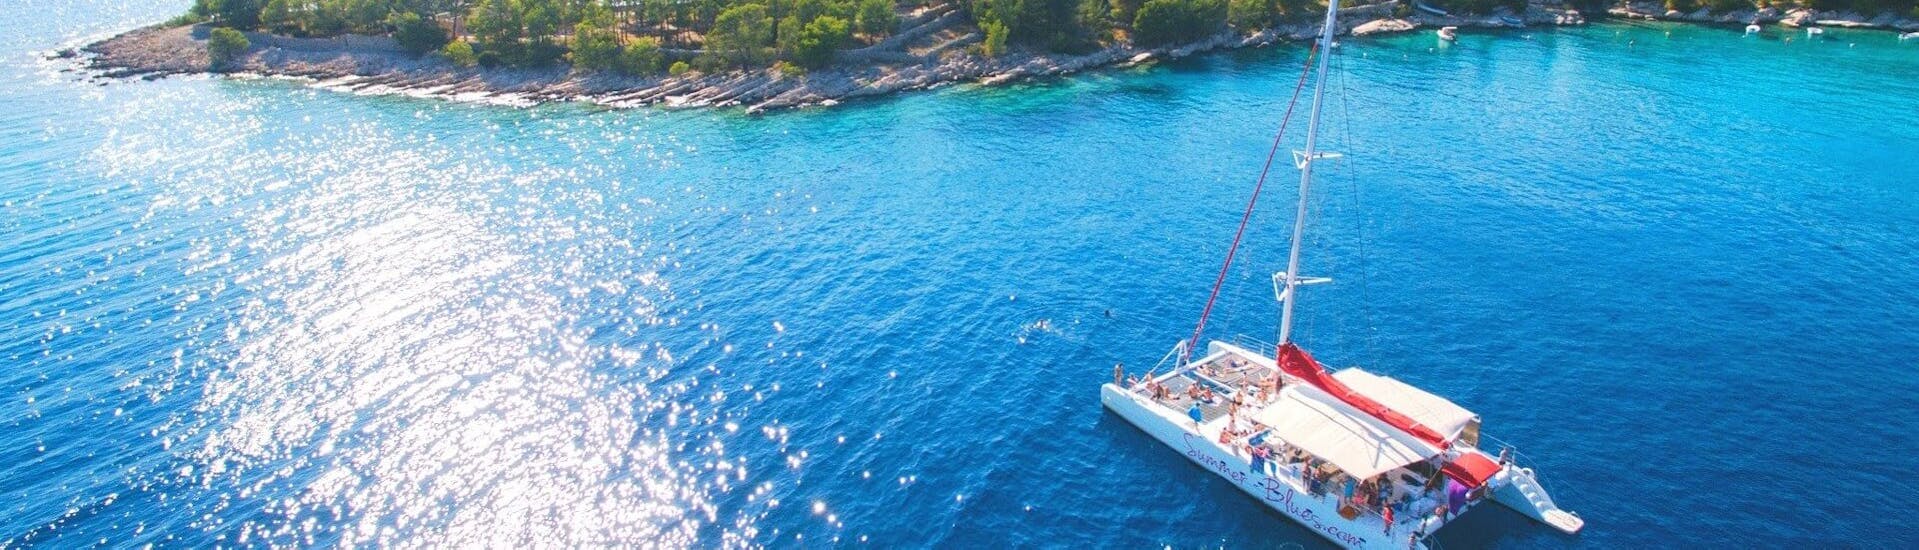 The catamaran in a bay during the tour from Split to the Krka Waterfalls & Blue Lagoon with Summer Blues Split.